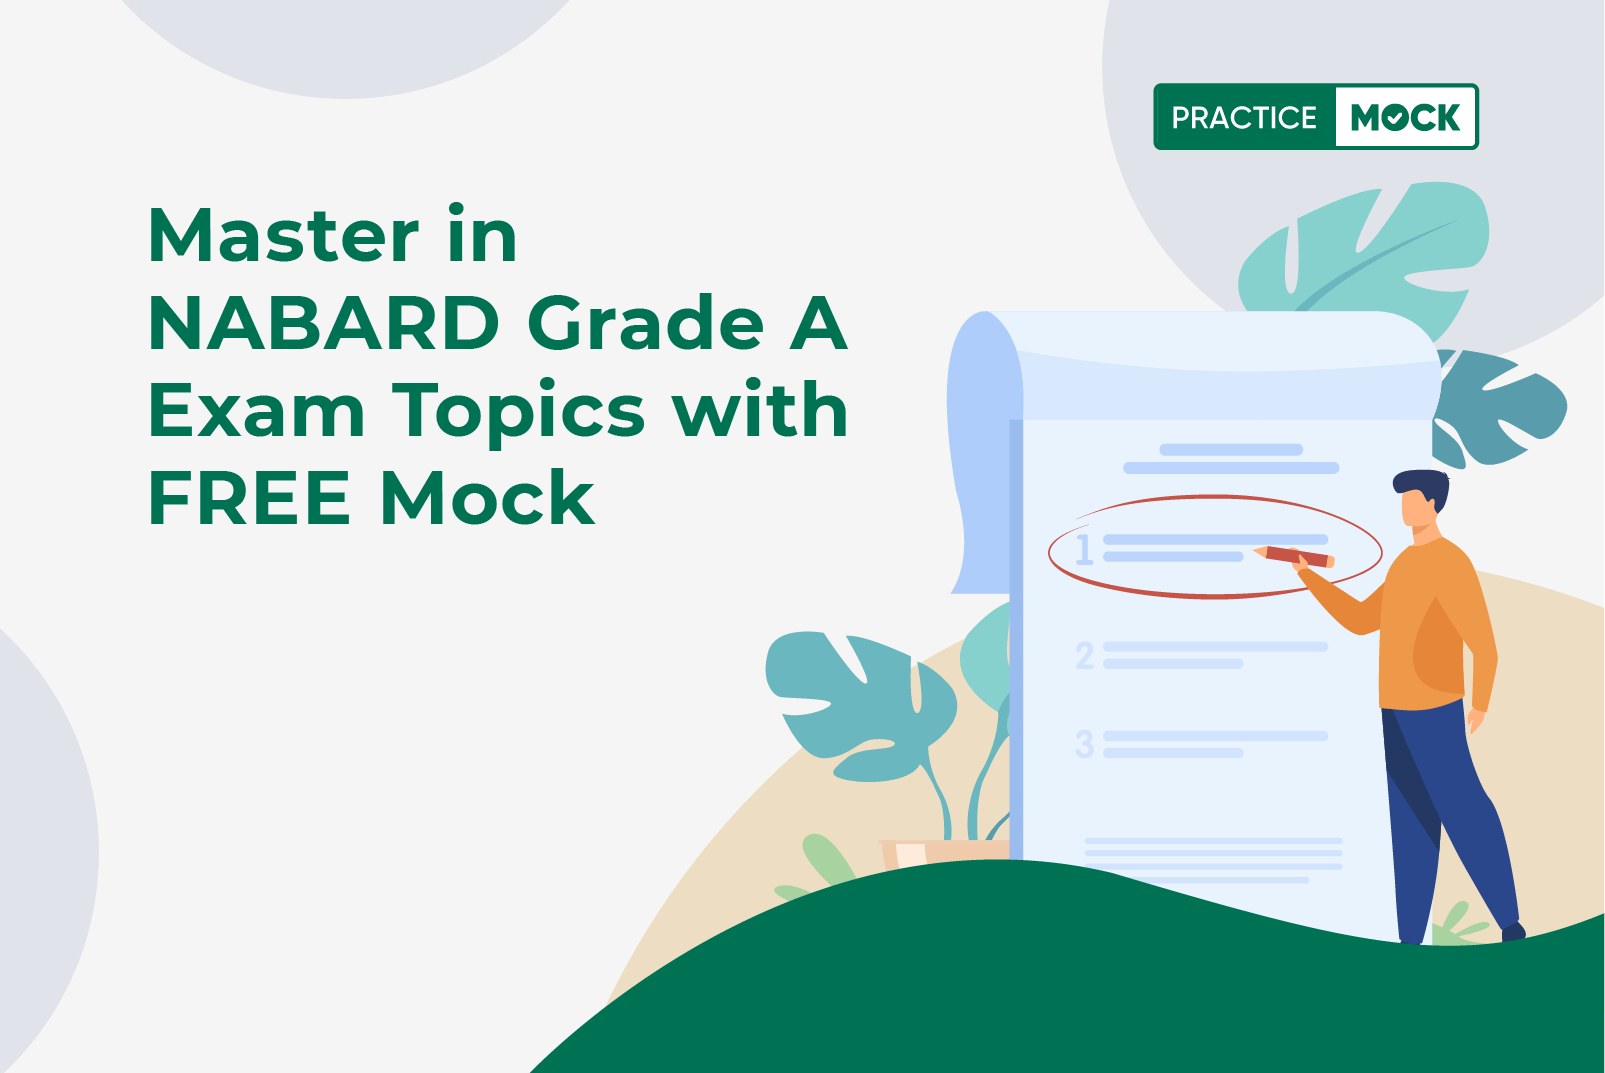 Master in NABARD Grade A Exam Topics with FREE Mock